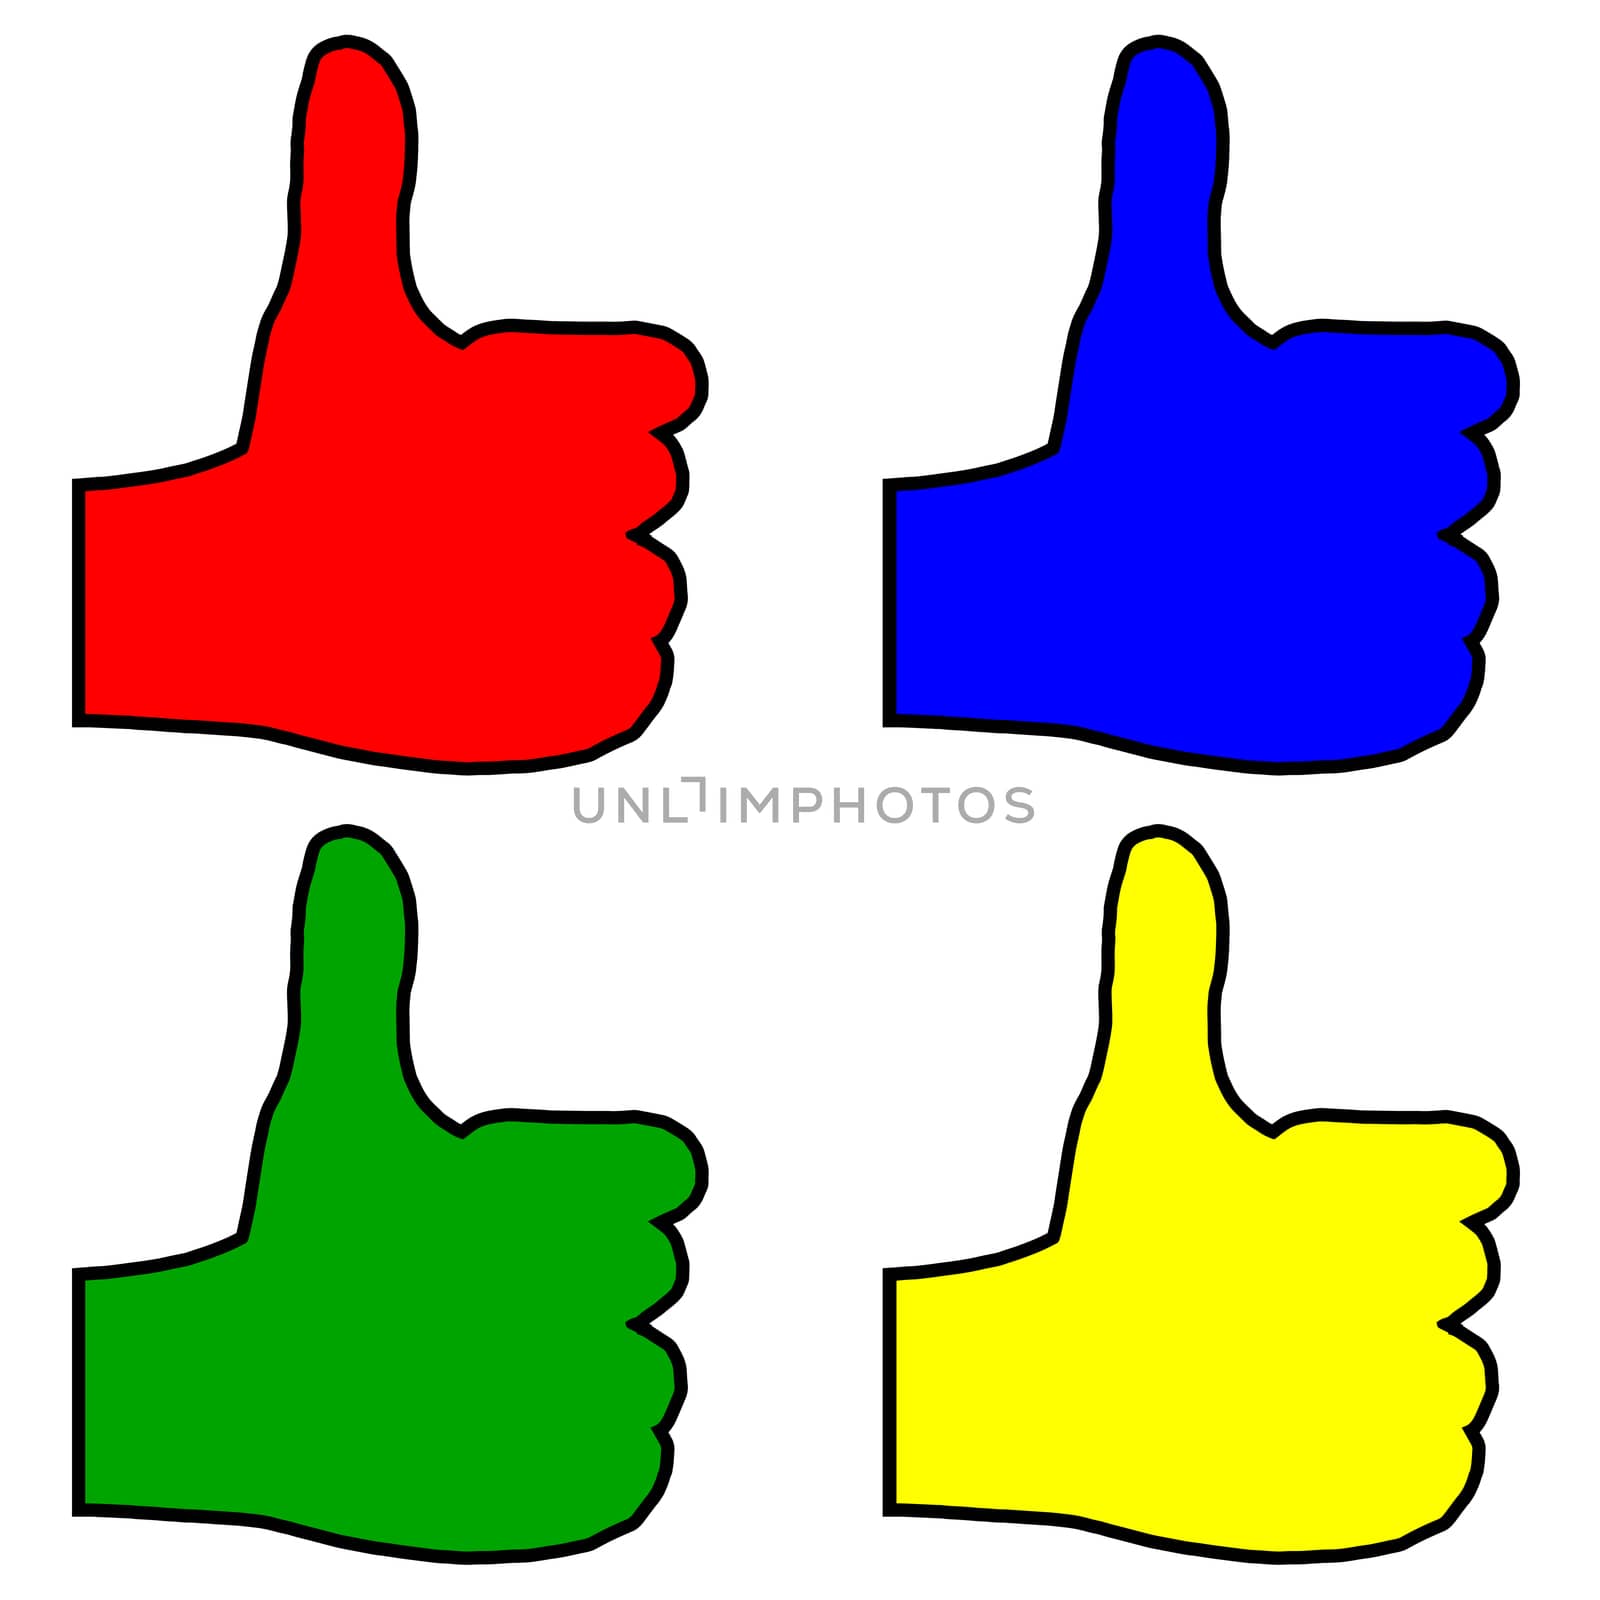 A green red blue and yellow hands giving the thumbs up sign all over a white background